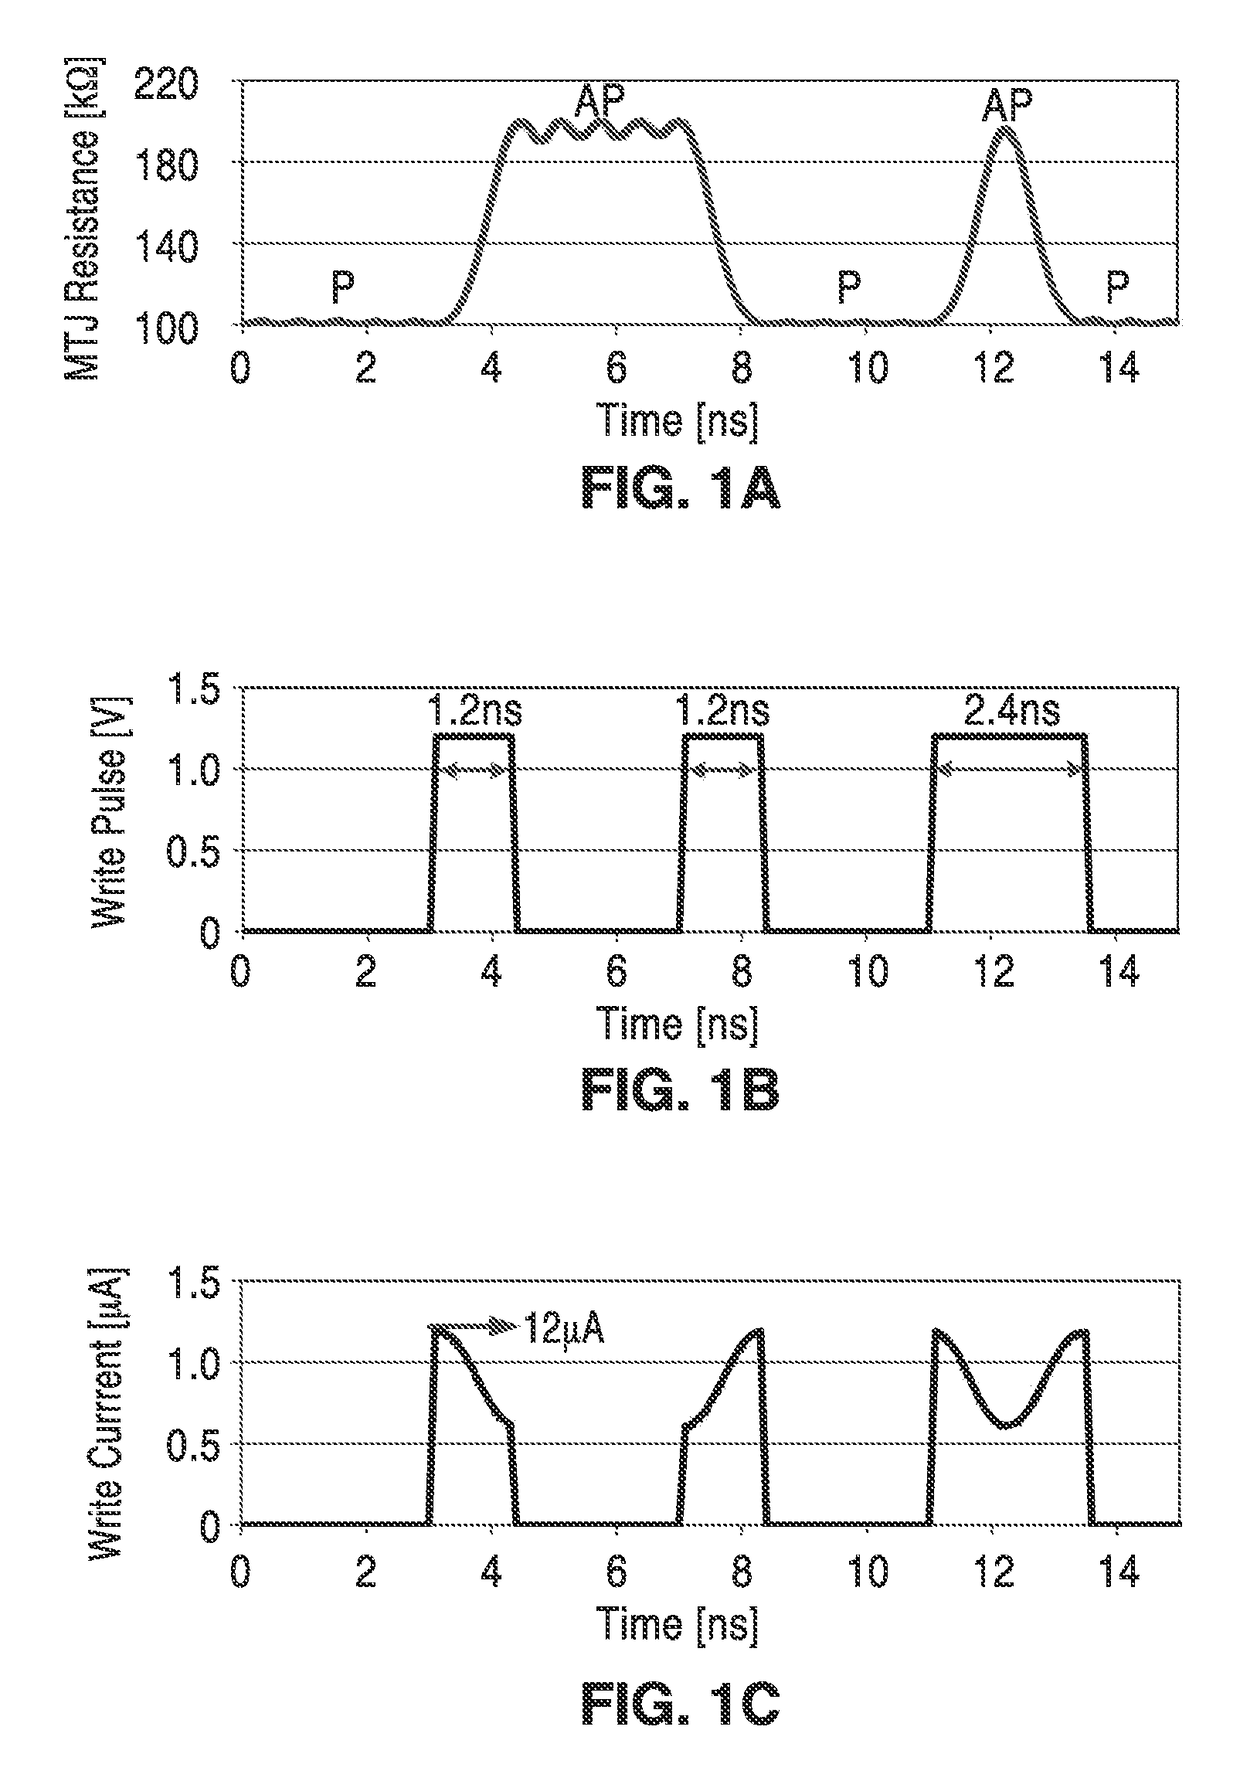 Fast and low-power sense amplifier and writing circuit for high-speed MRAM